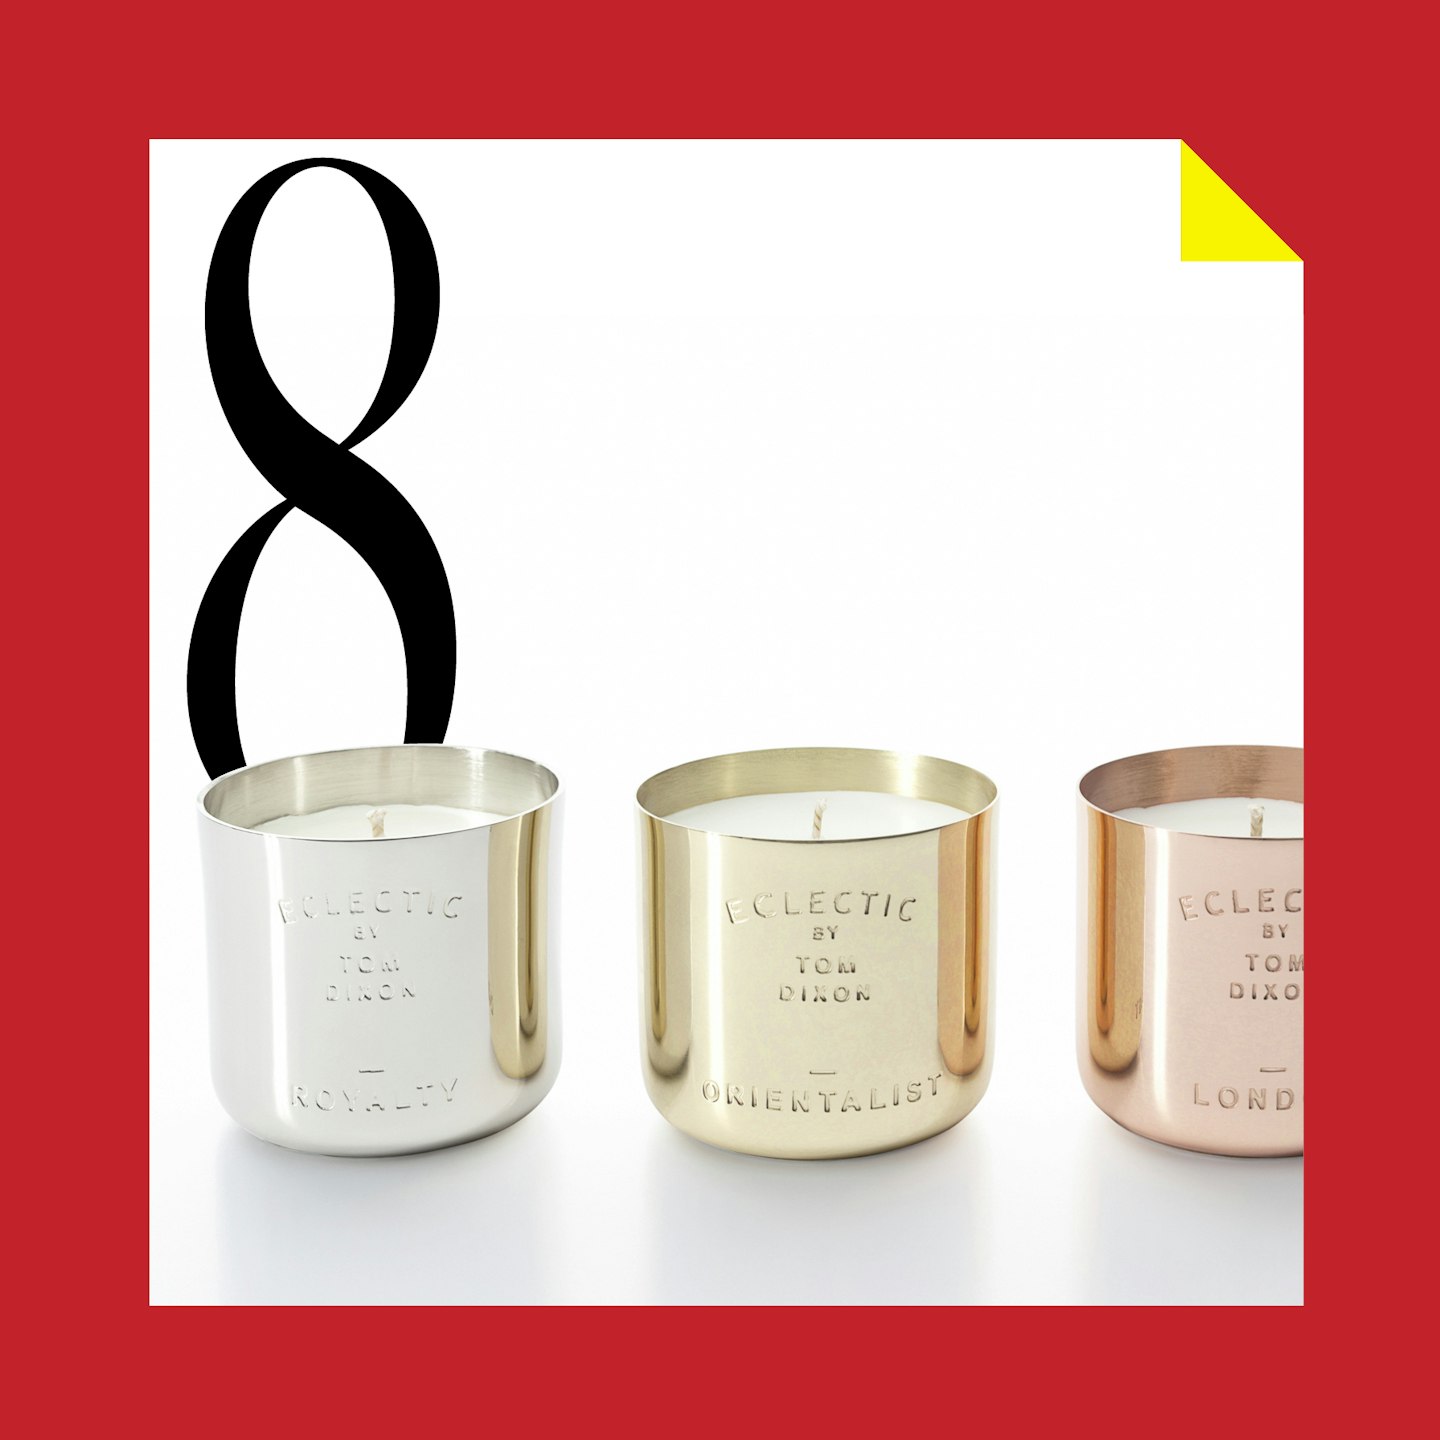 8 December - Eclectic Candle Giftset from Tom Dixon